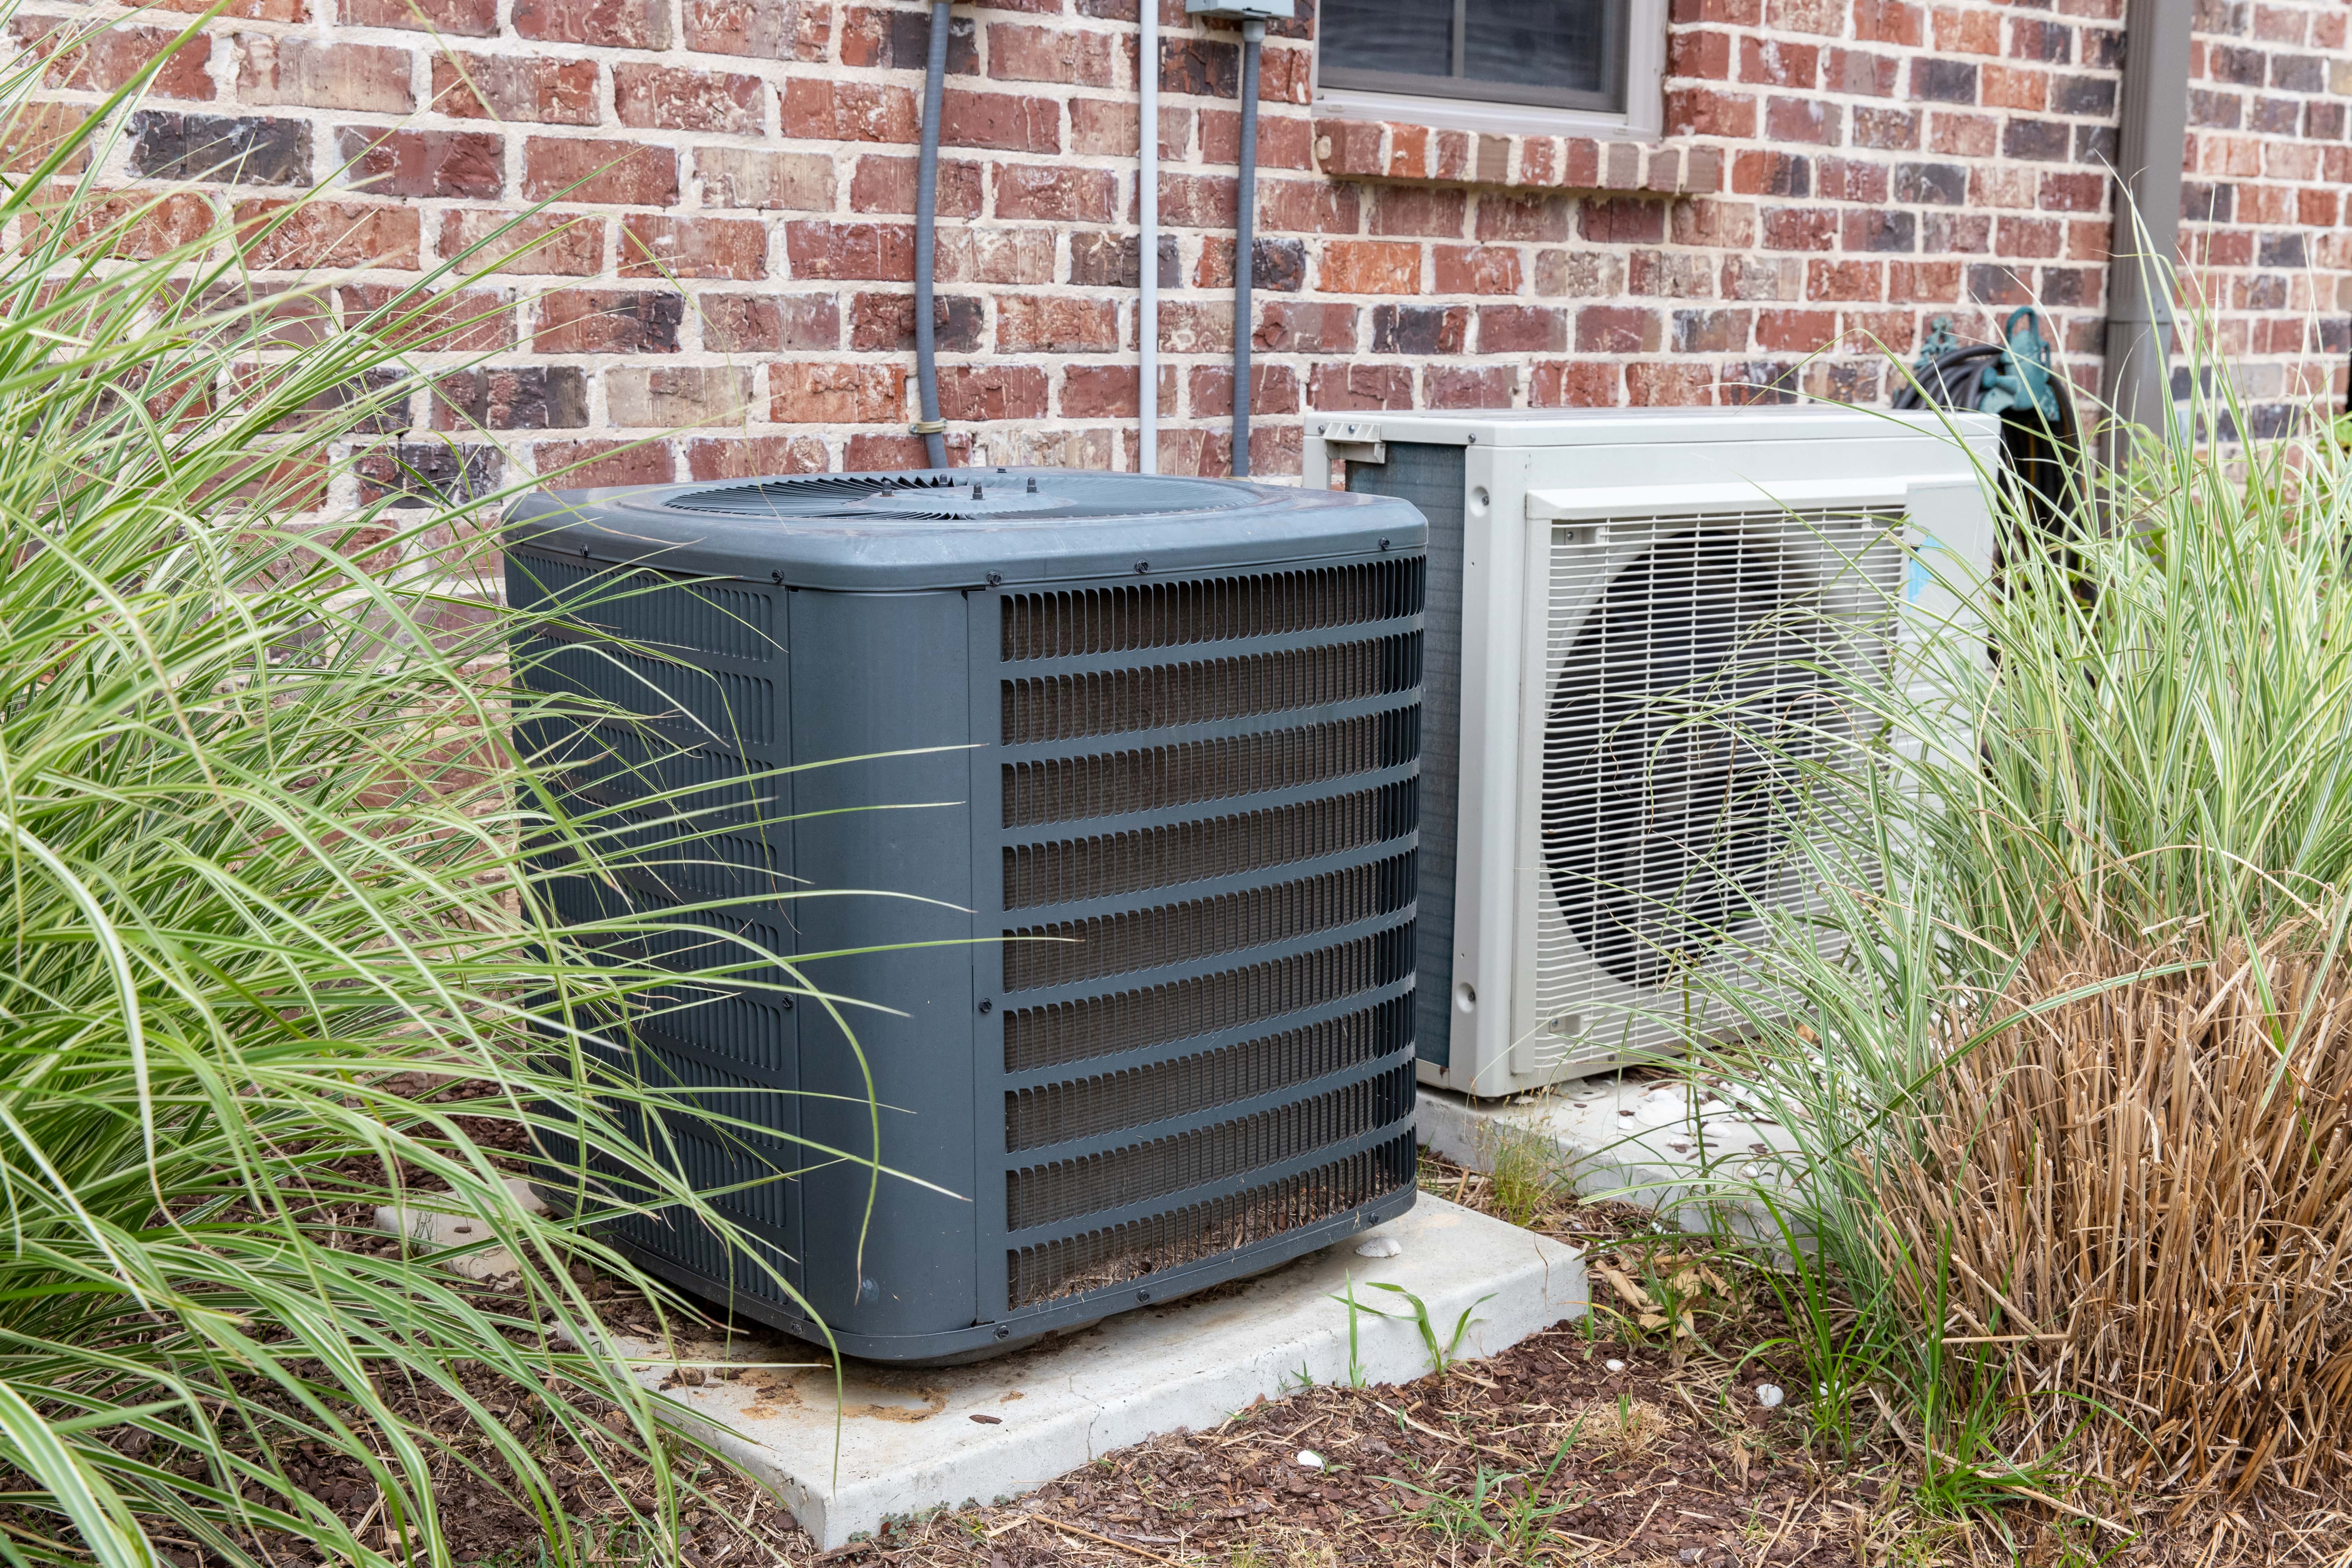  What Are The Benefits Of Hvac Repair? Tips and Tricks thumbnail